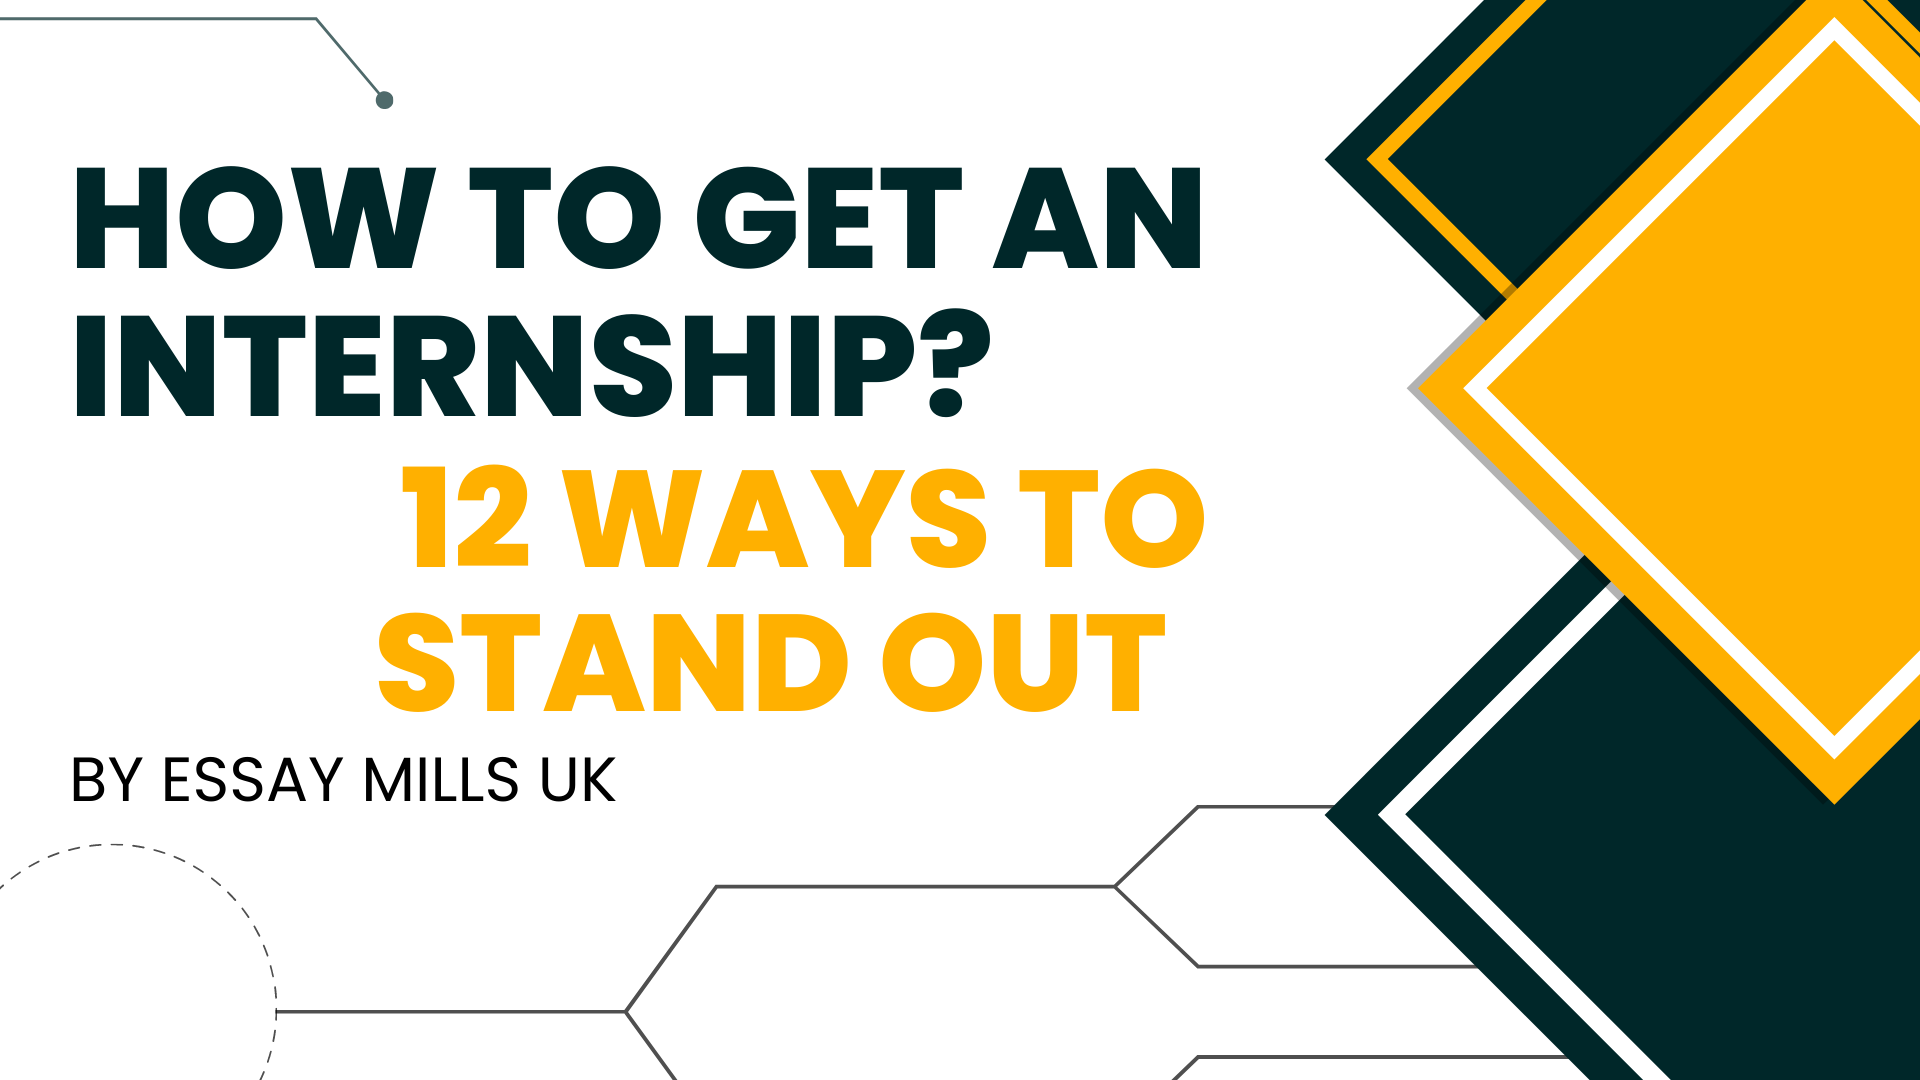 How to Get an Internship? 12 Ways to Stand Out